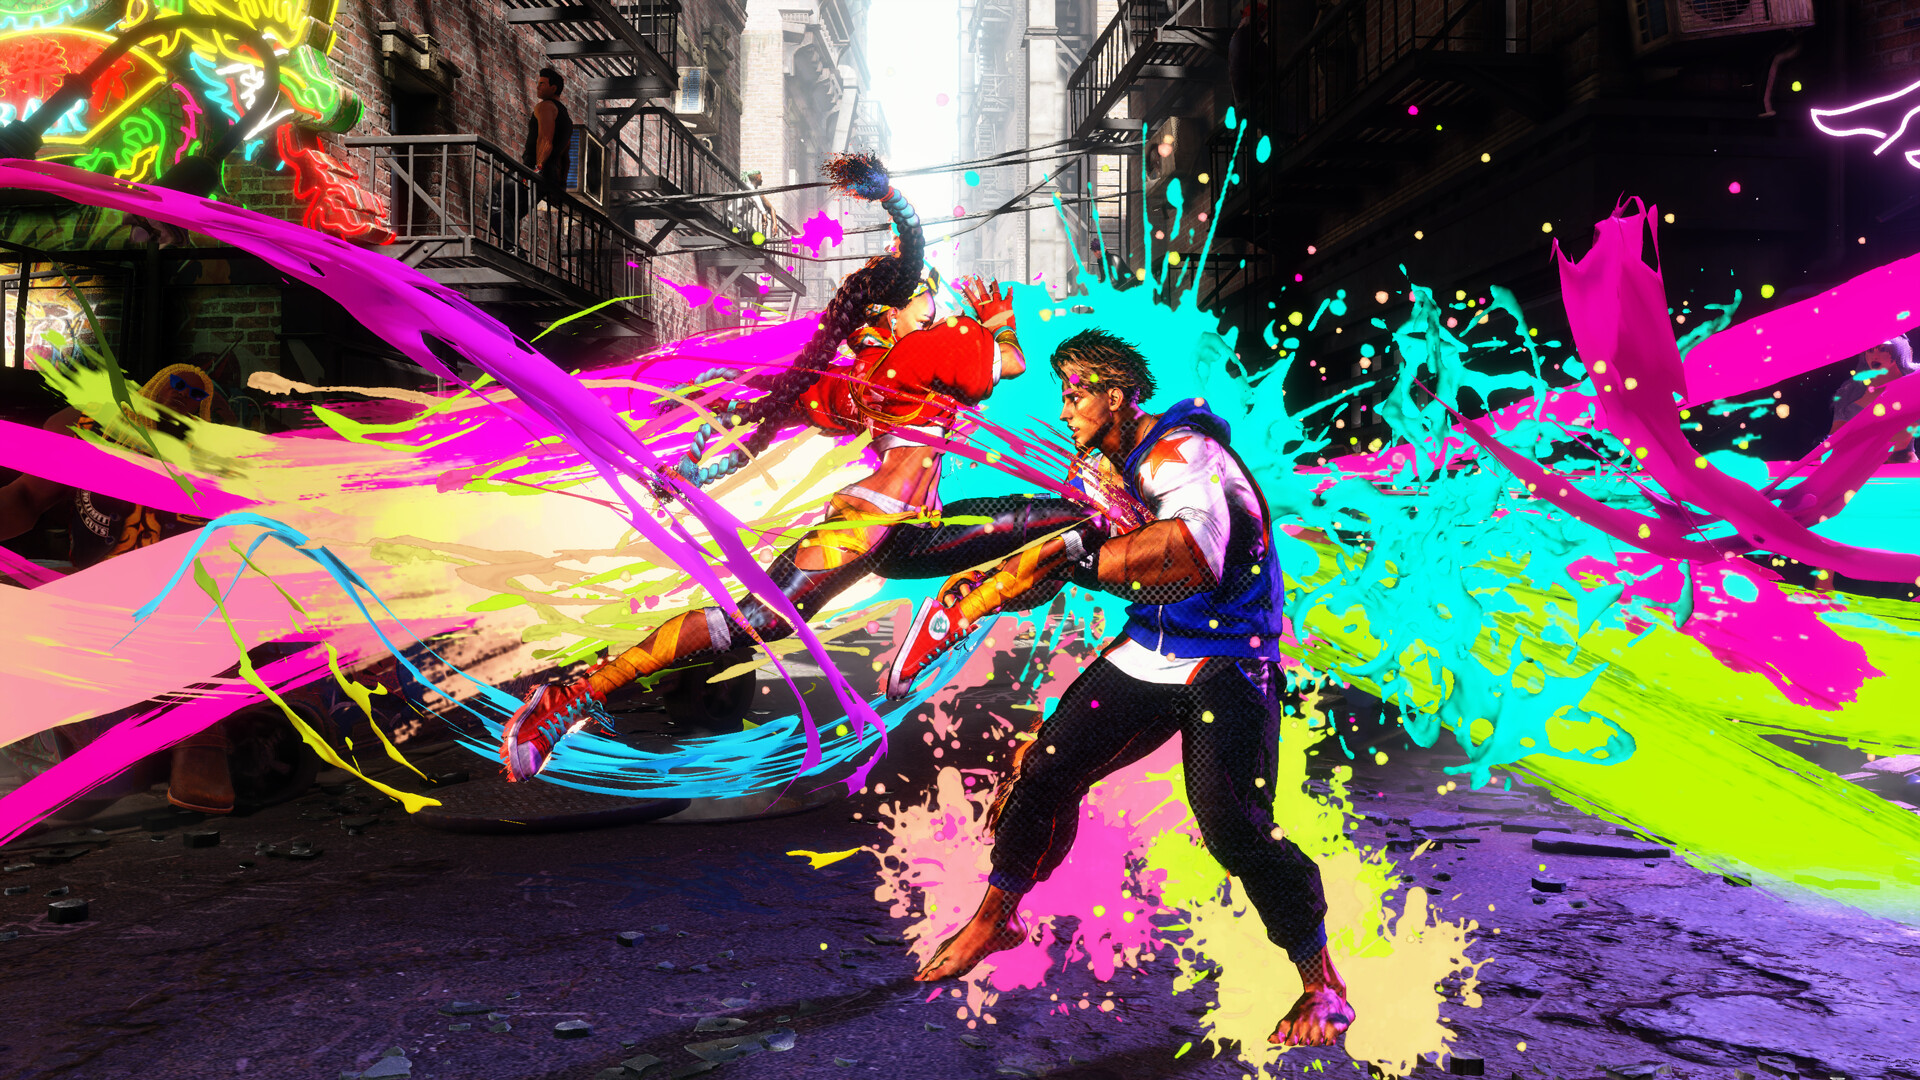 Splash paint effects in bright neon colors surround two fighters in Street Fighter 6